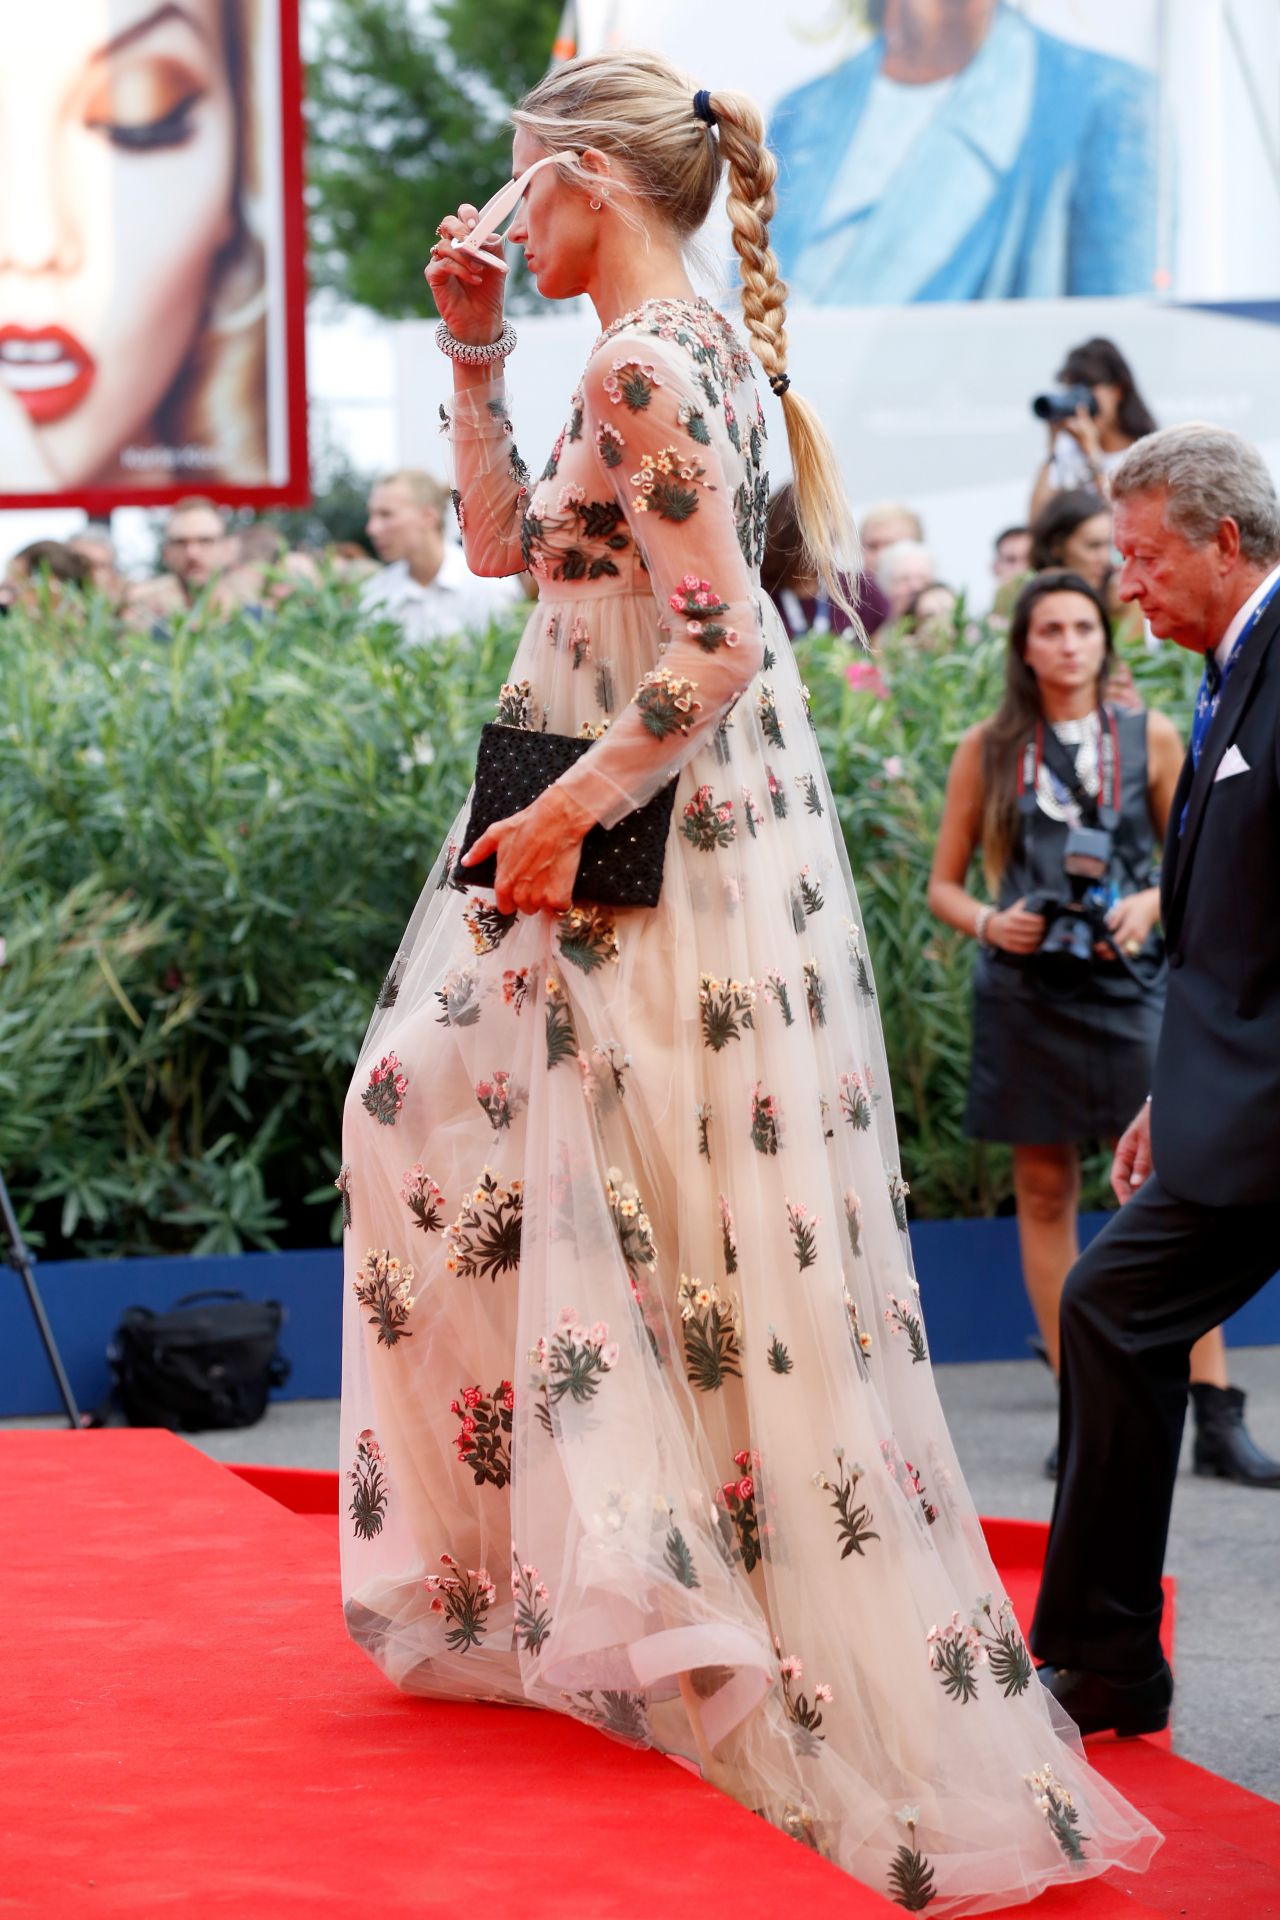 laura-bailey-opening-ceremony-and-premiere-of-everest-2015-venice-film-festival_5-1